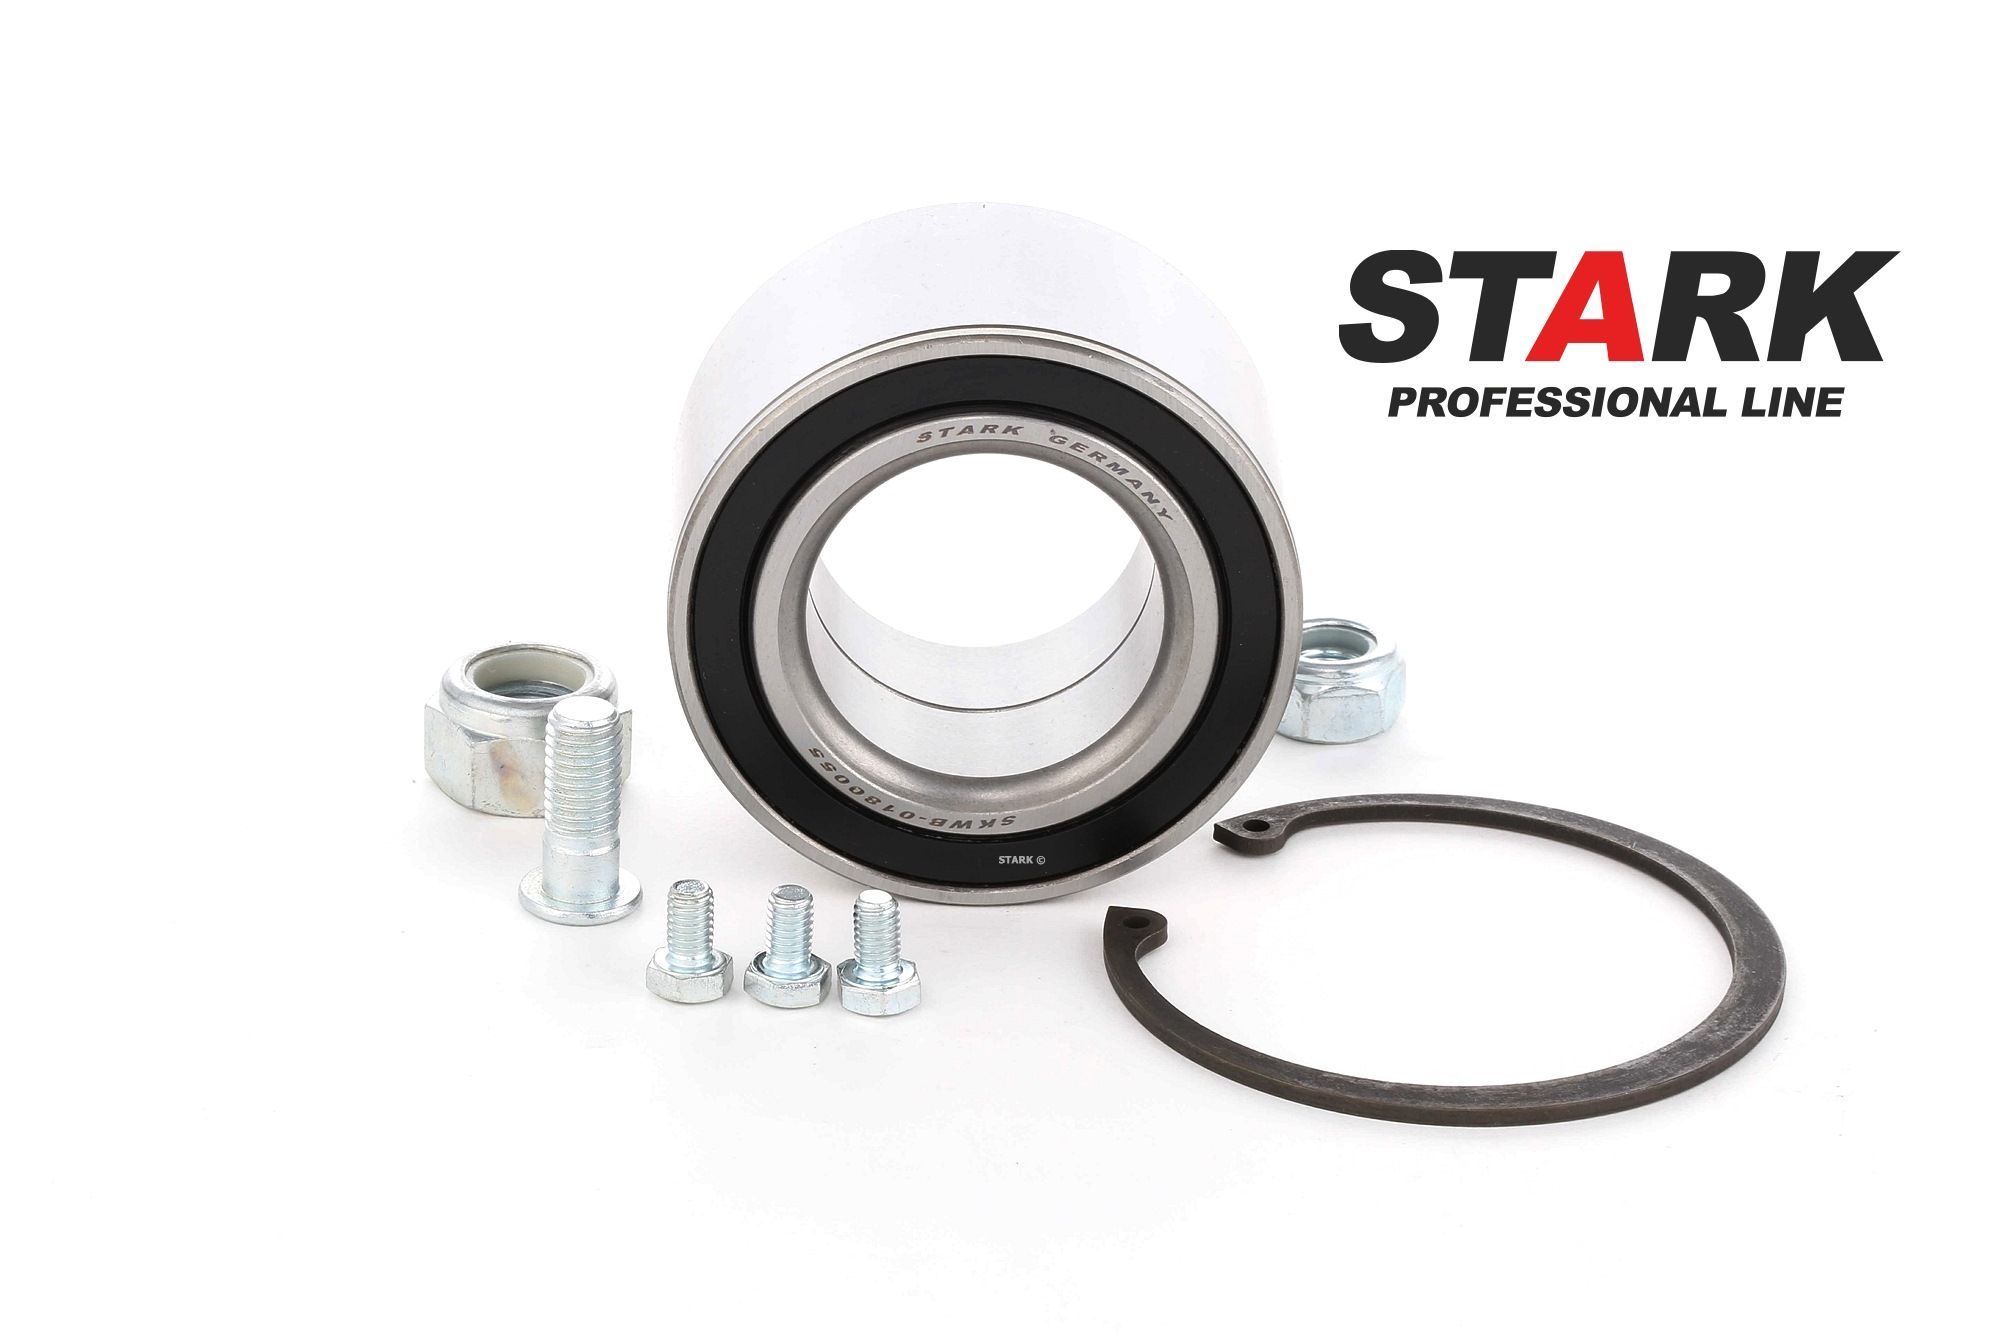 STARK SKWB-0180055 Wheel bearing kit Front axle both sides, Rear Axle both sides